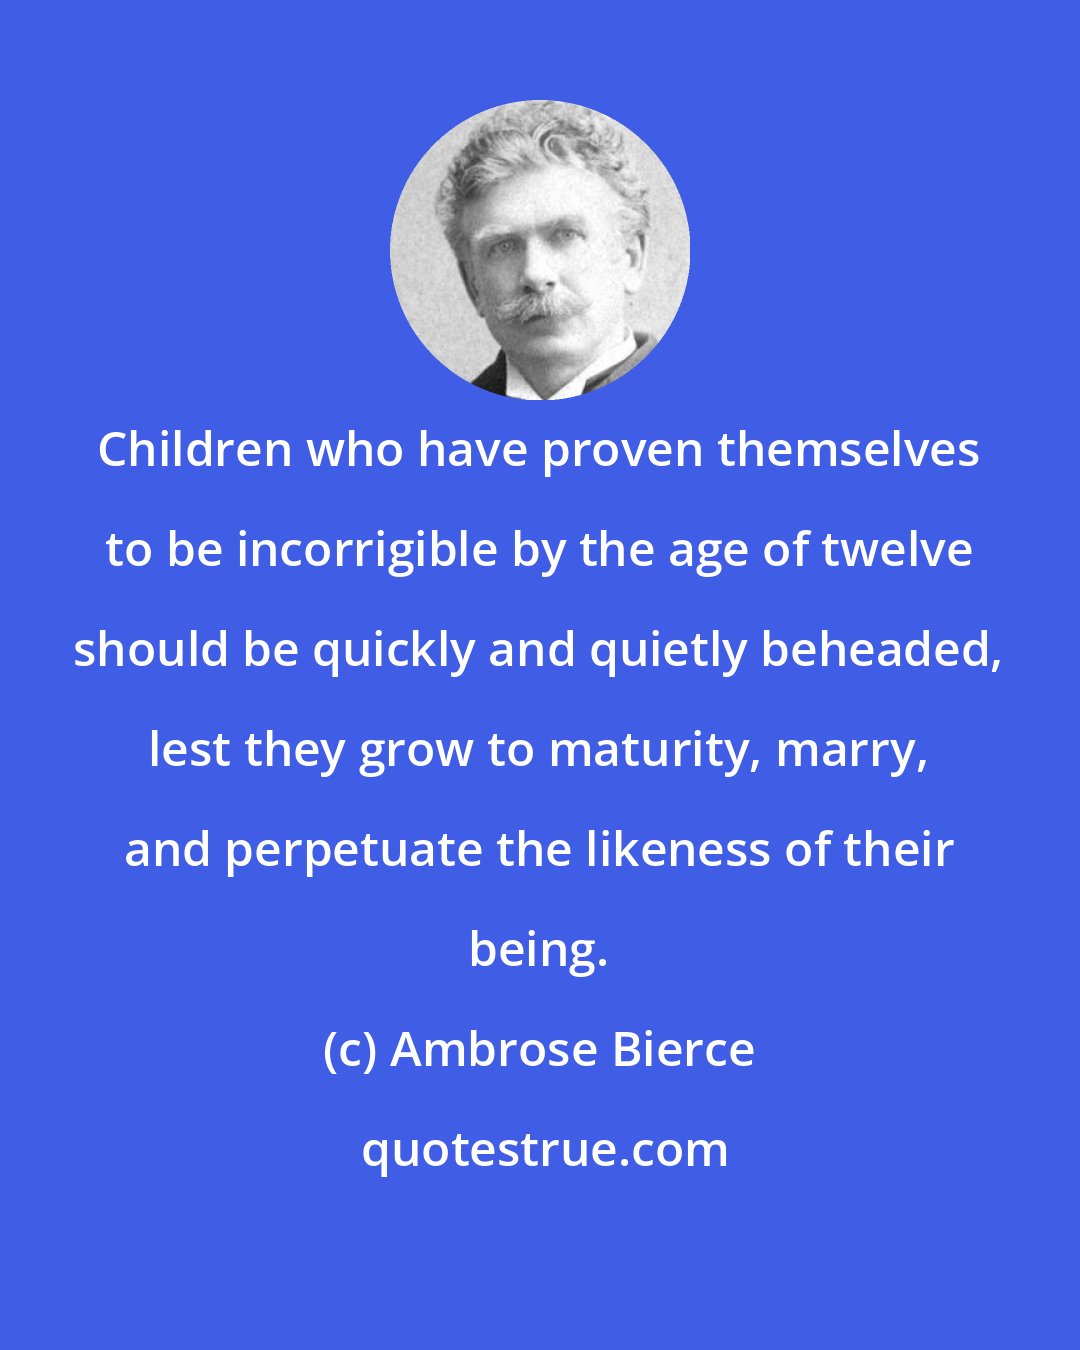 Ambrose Bierce: Children who have proven themselves to be incorrigible by the age of twelve should be quickly and quietly beheaded, lest they grow to maturity, marry, and perpetuate the likeness of their being.